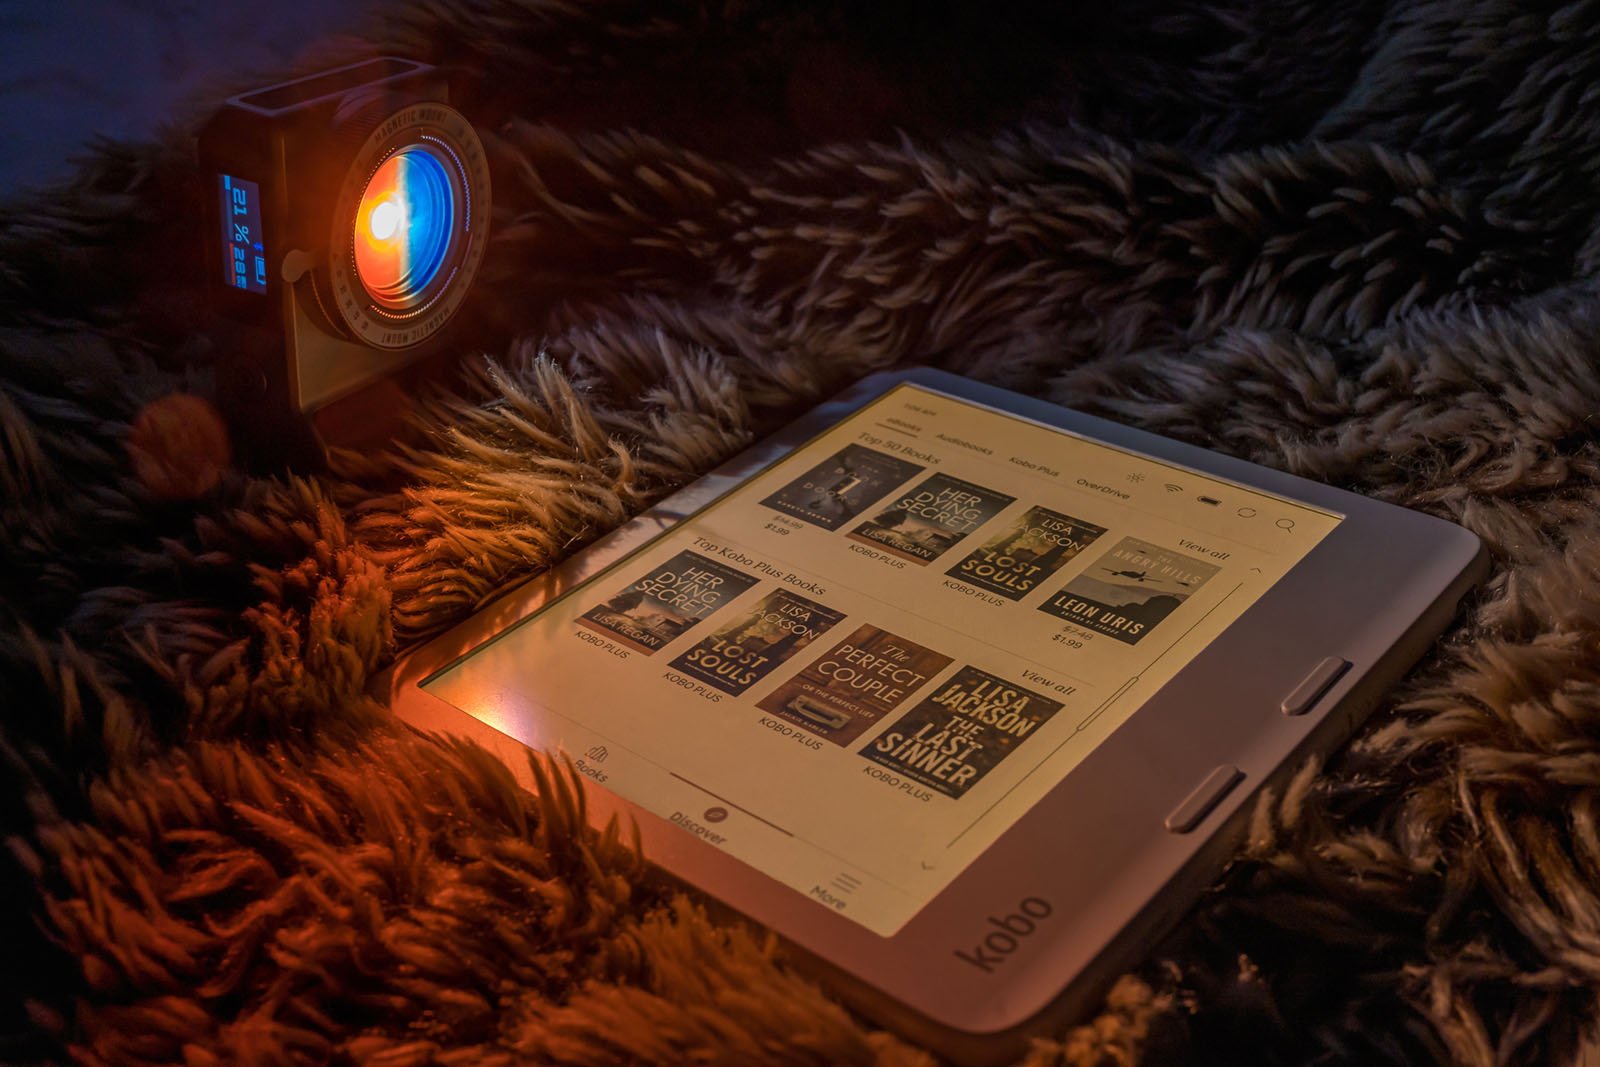 A Kobo e-reader displays a selection of books while resting on a fluffy, dark-colored surface. A vintage-style camera with a glowing blue light lens is positioned nearby, casting an orange glow and creating a warm, cozy atmosphere.